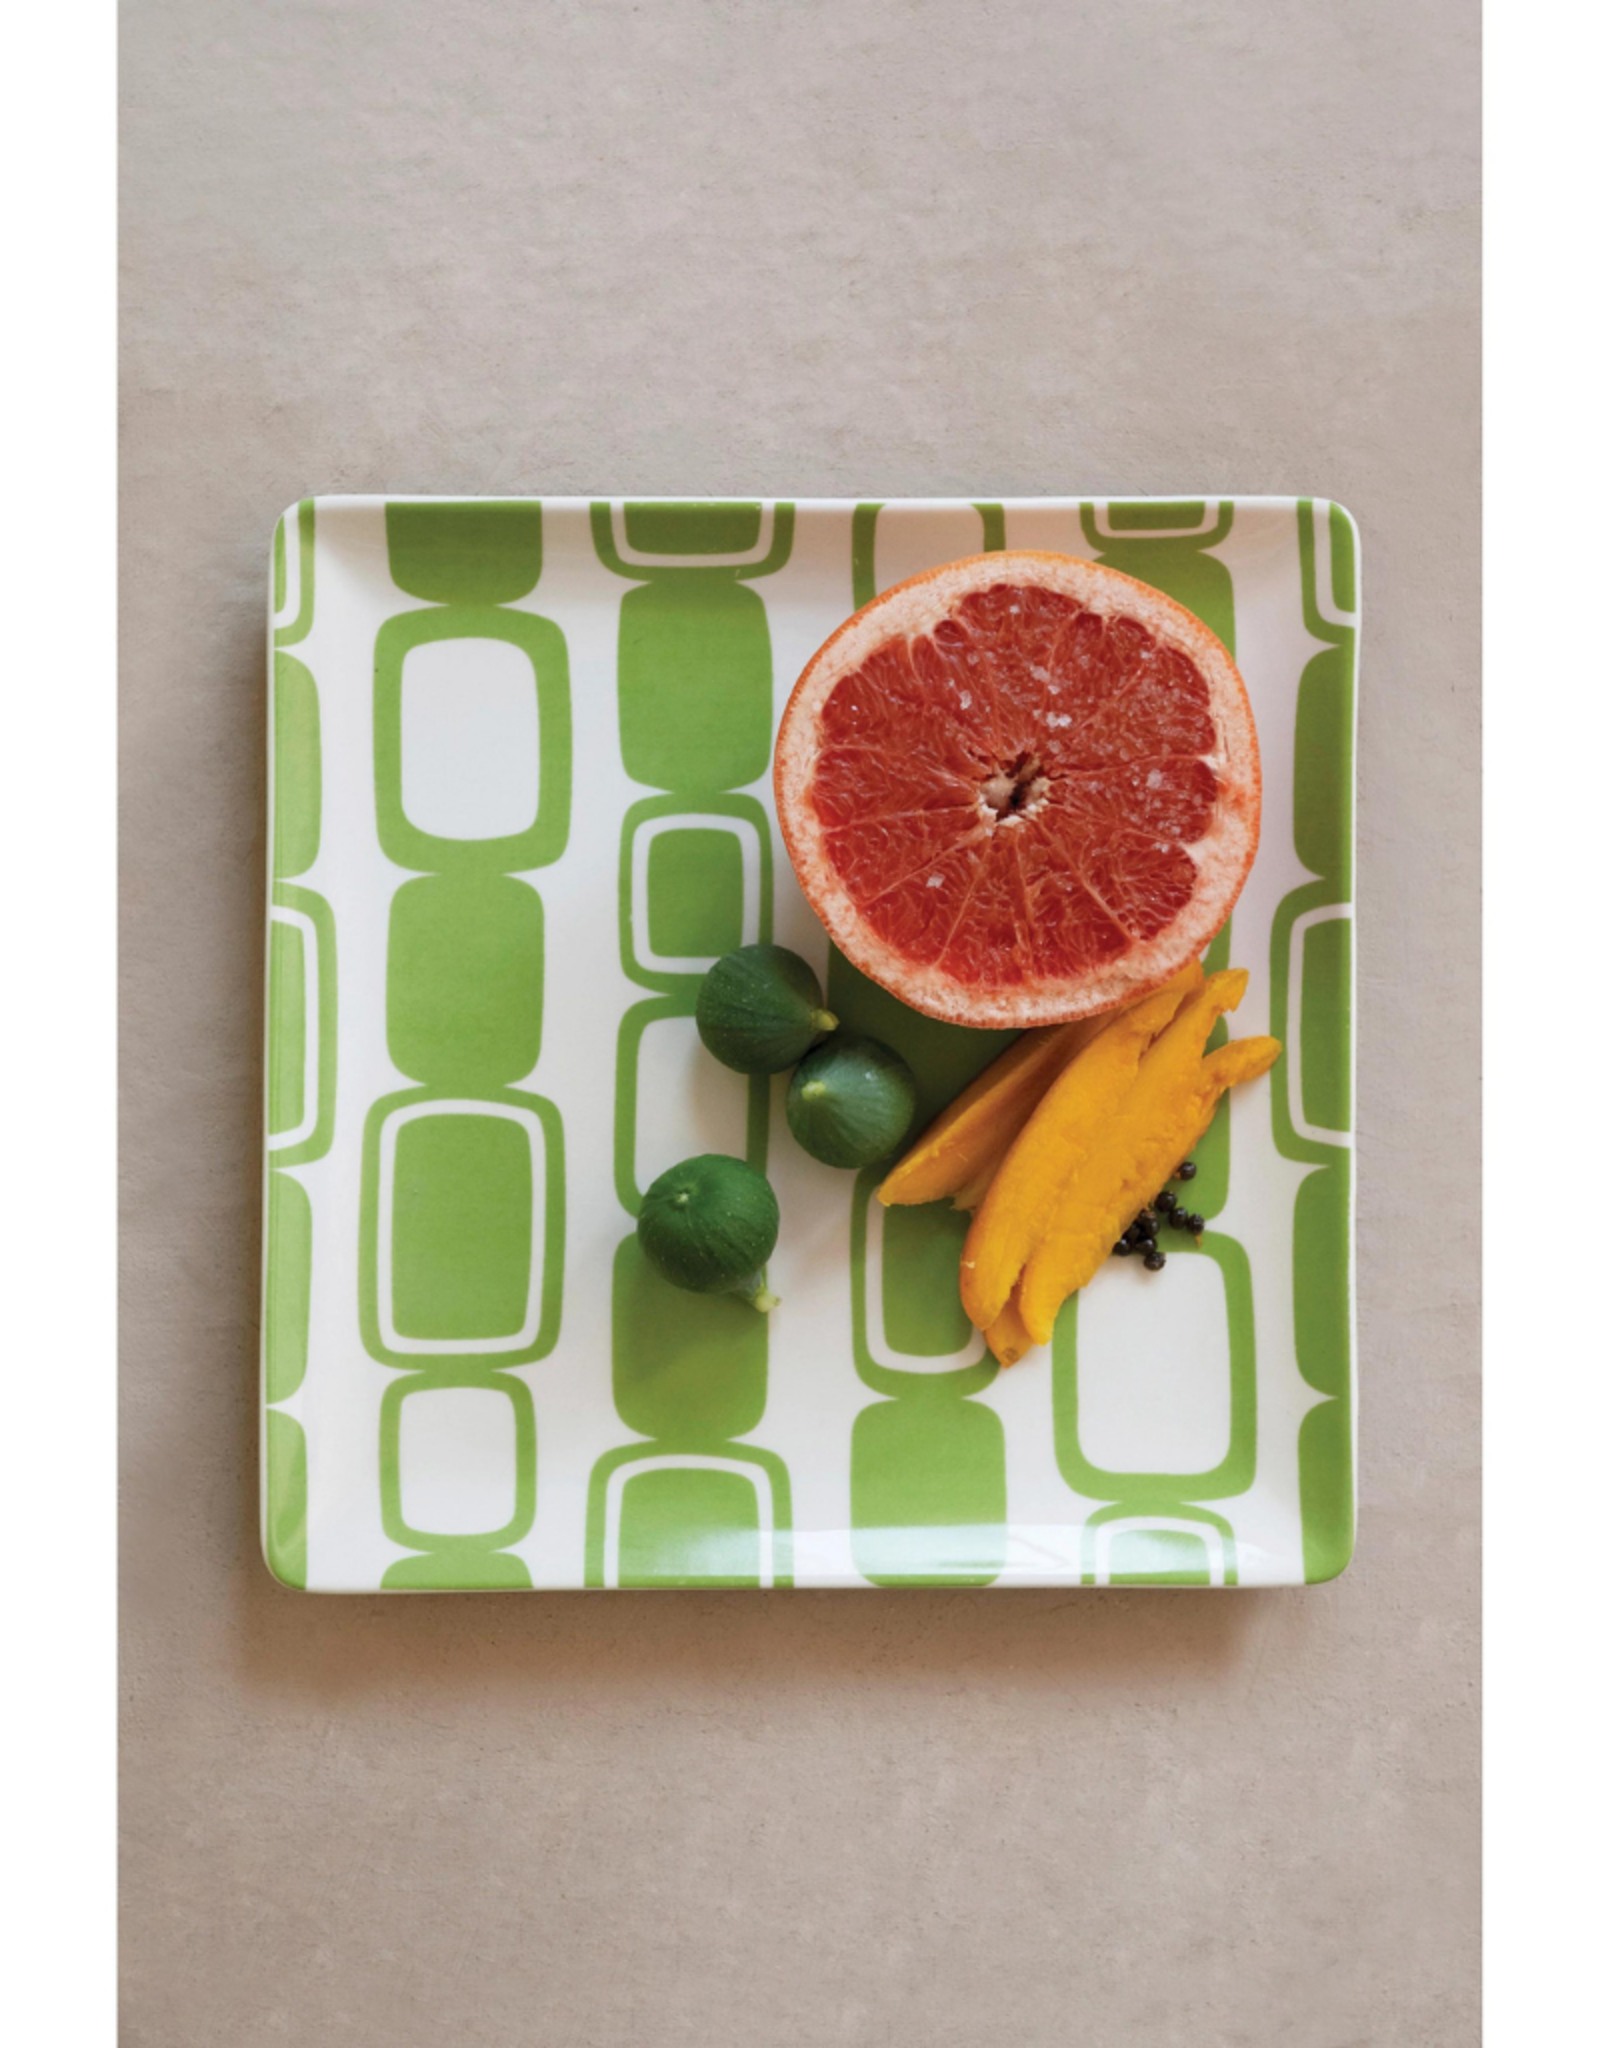 PLATE-PATTERN-GREEN/WHITE RECTANGLE